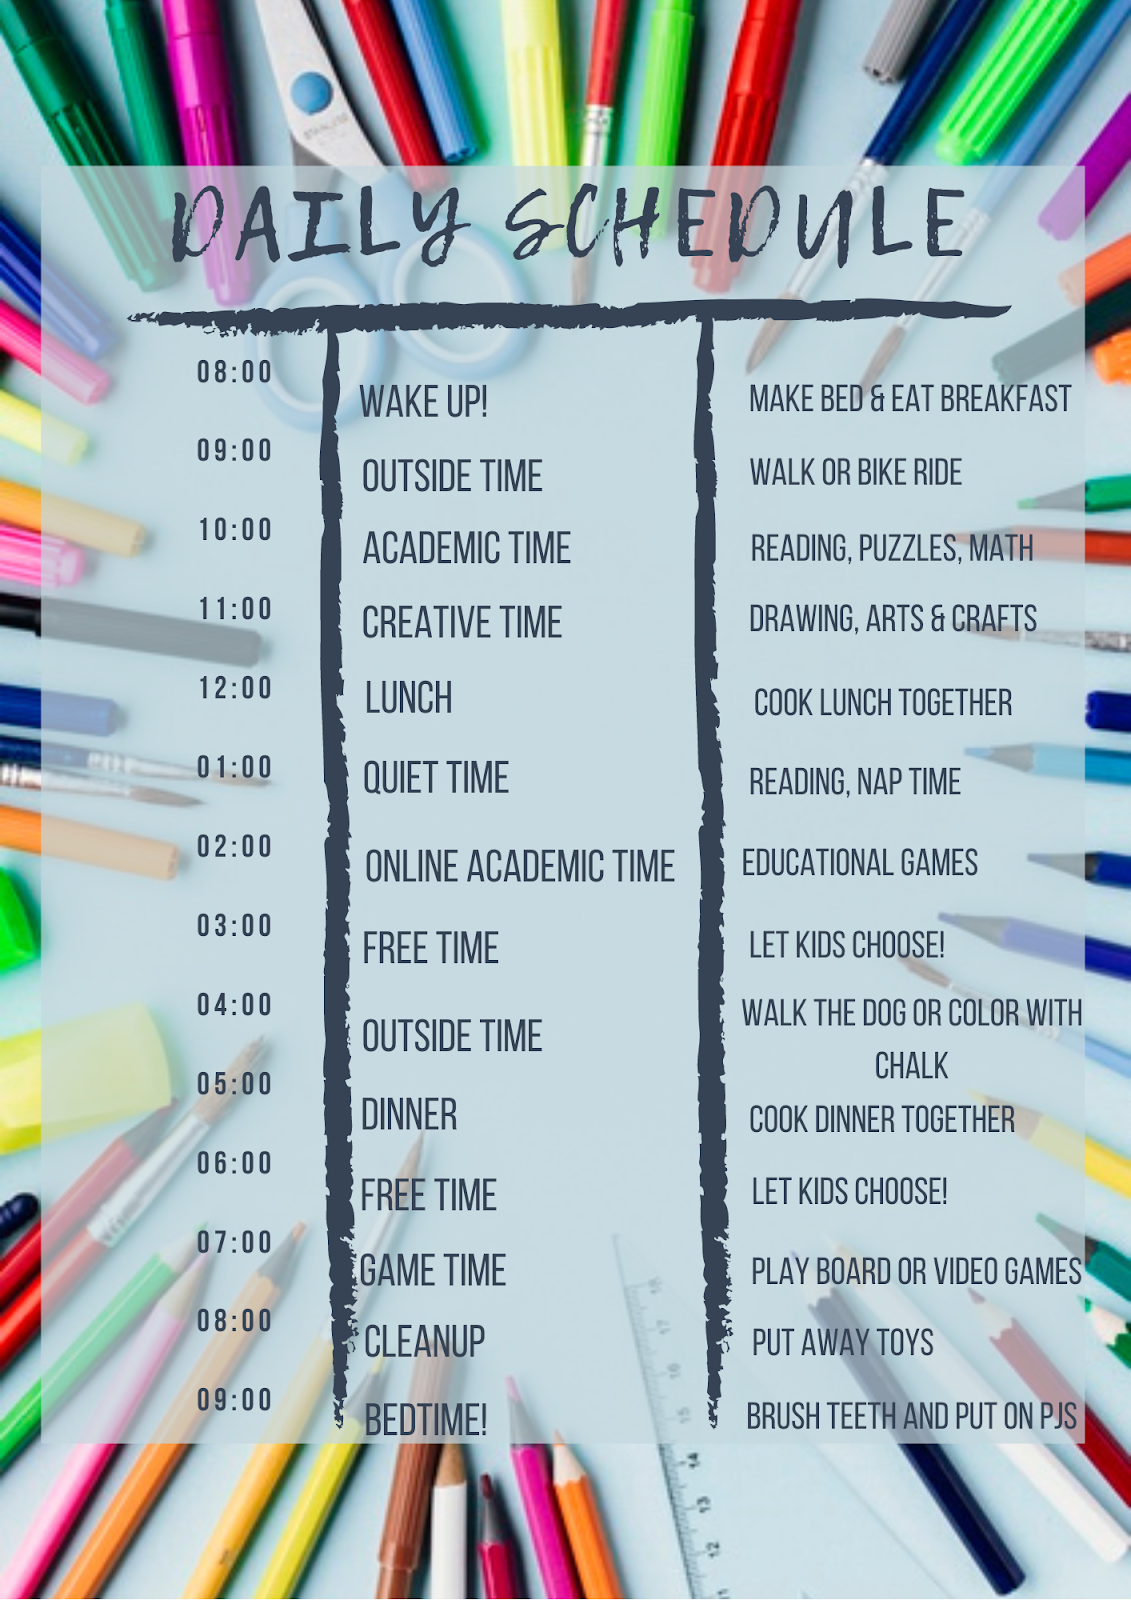 55 Things You Can Do To Keep Your Kids Entertained at Home: Daily Schedule 